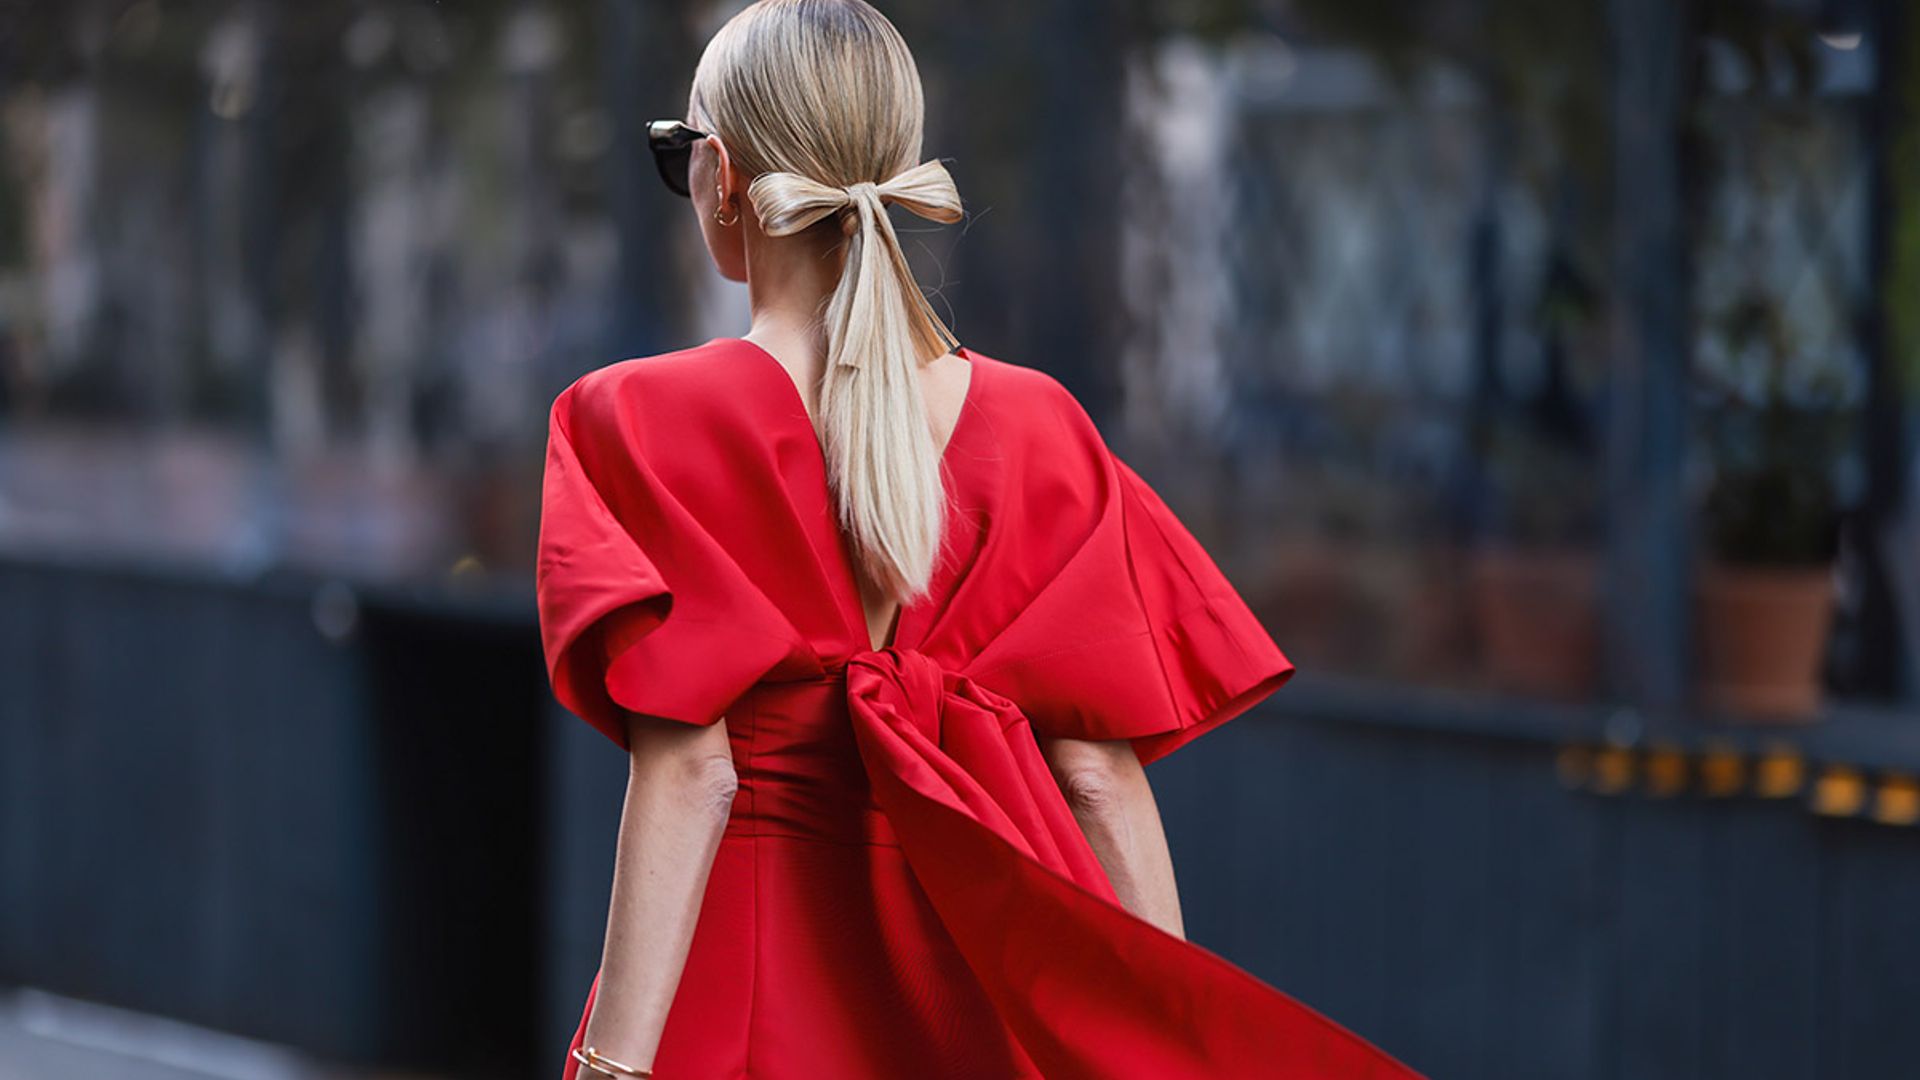 14 of the hottest red dresses to turn heads in this season